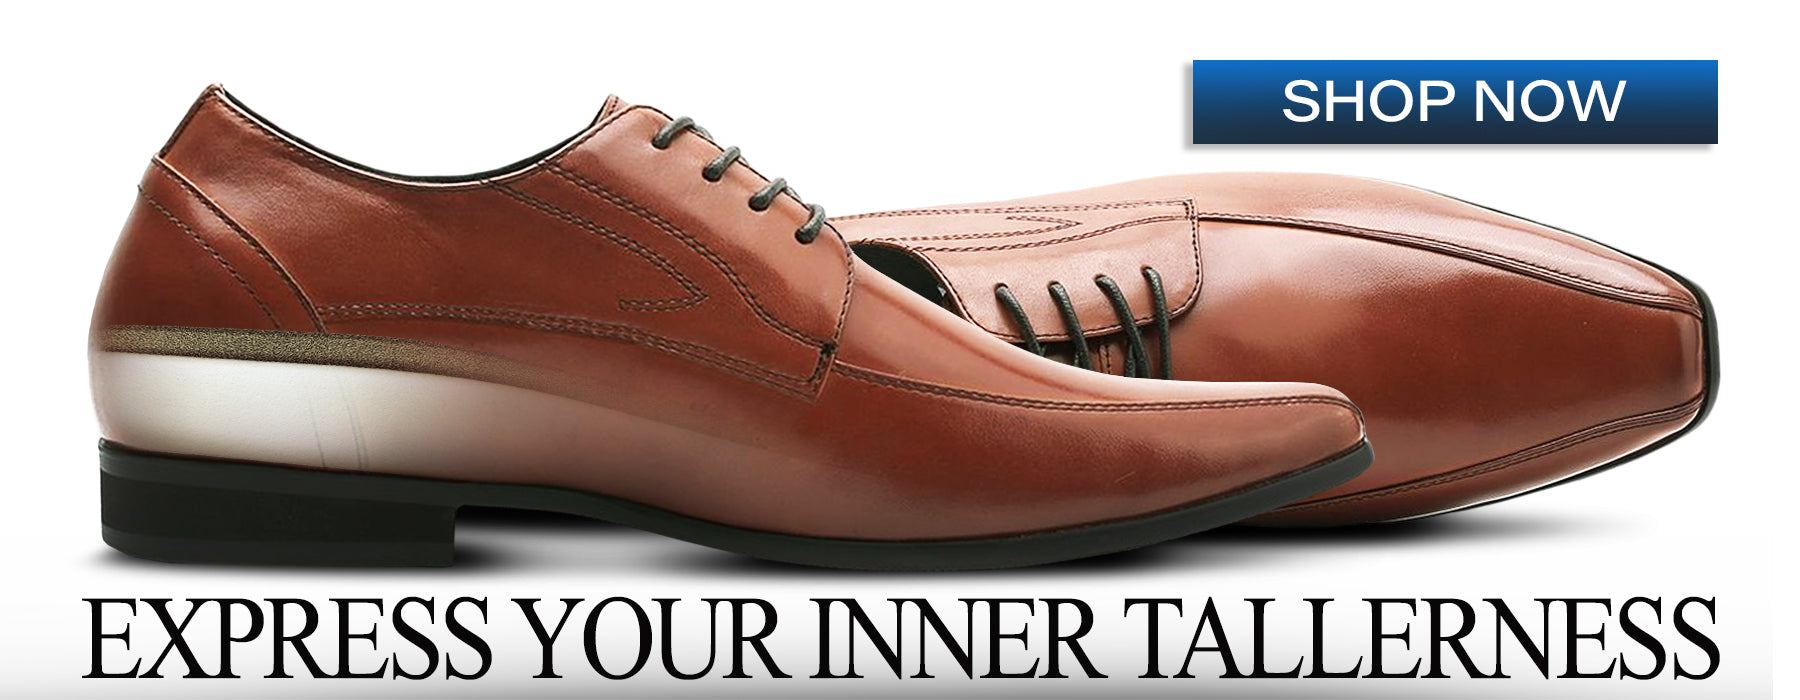 The Perfect Gift For Men | JENNEN Heel Lift Shoes - JENNEN Shoes